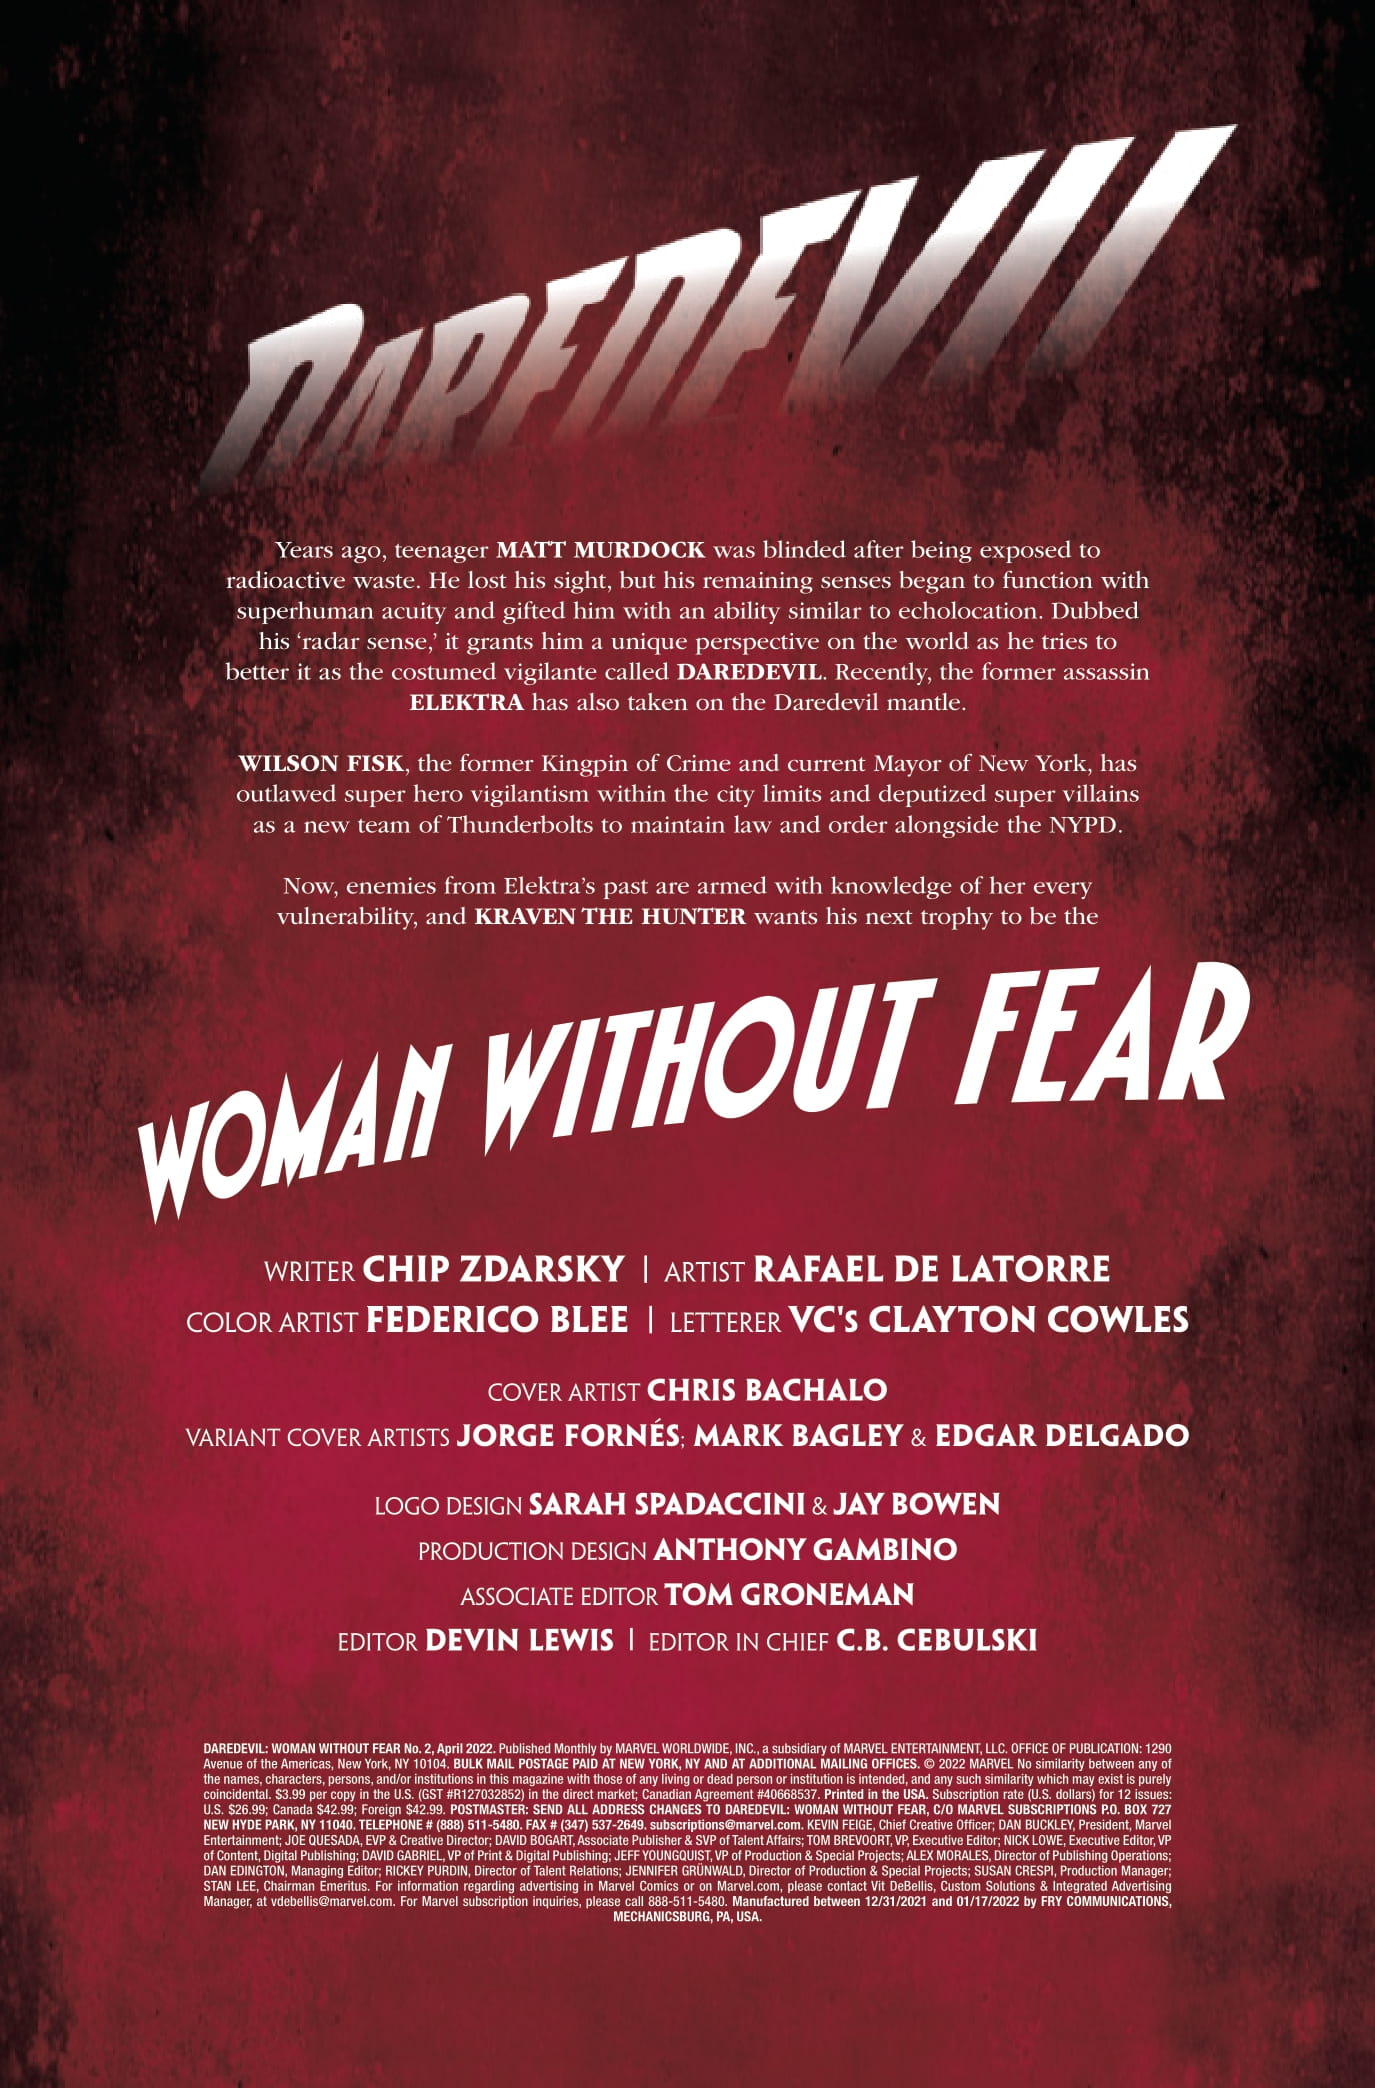 daredevil-woman-without-fear-2-p1